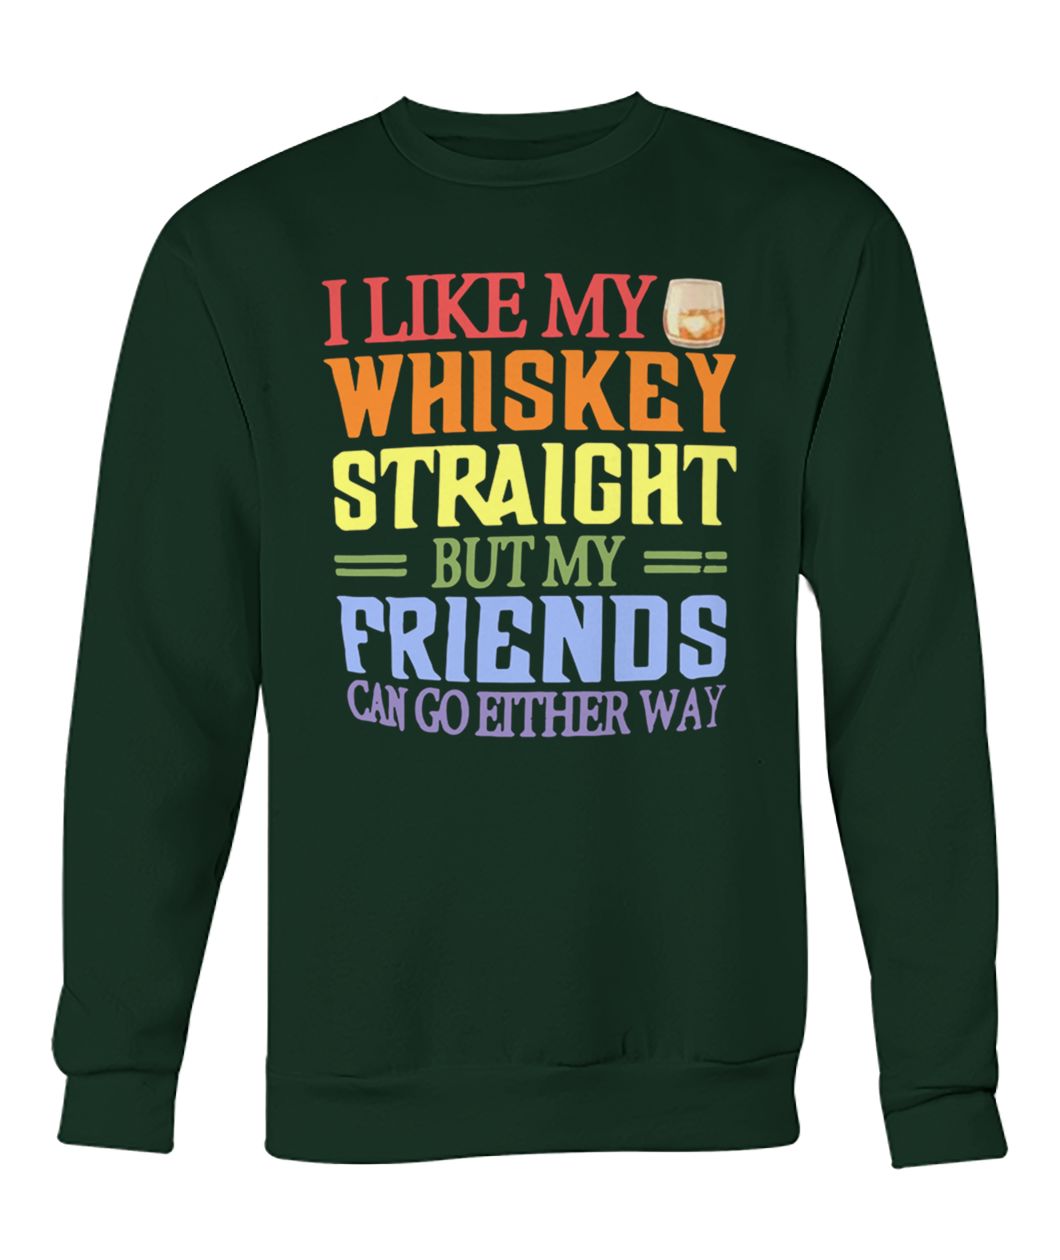 I like my whiskey straight but my friends can go either way crew neck sweatshirt